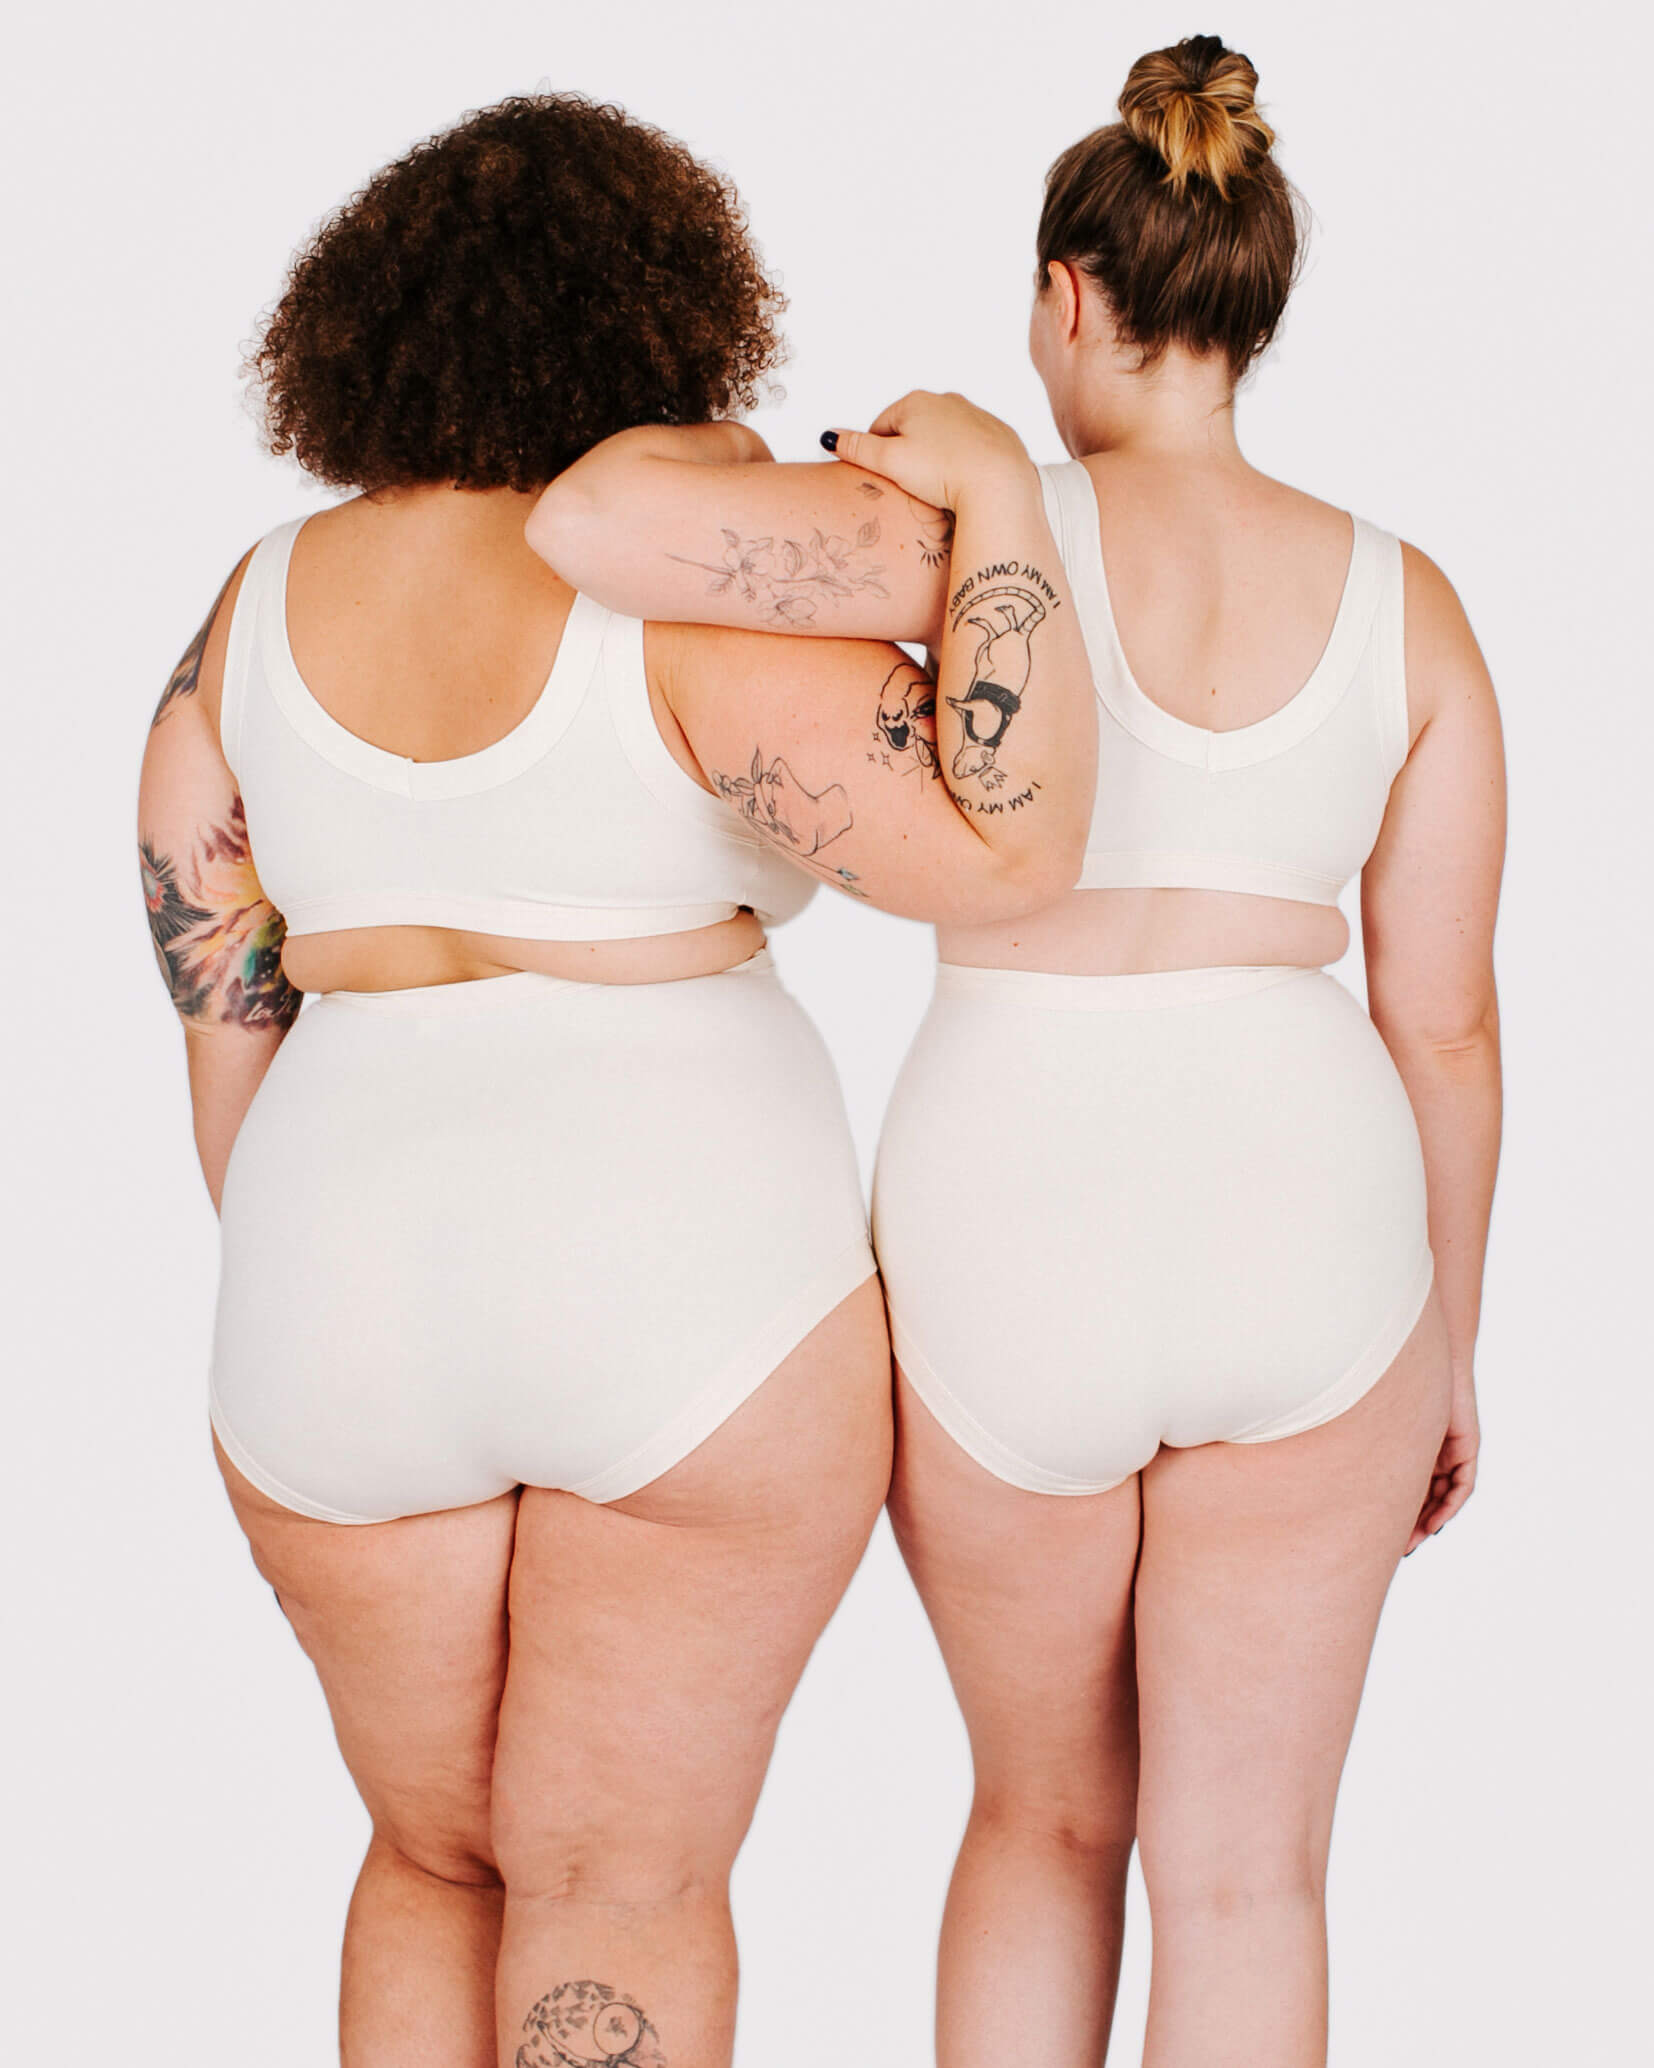 Fit photo from the back of Thunderpants organic cotton Sky Rise style underwear and Bralette in off-white on two models standing together.